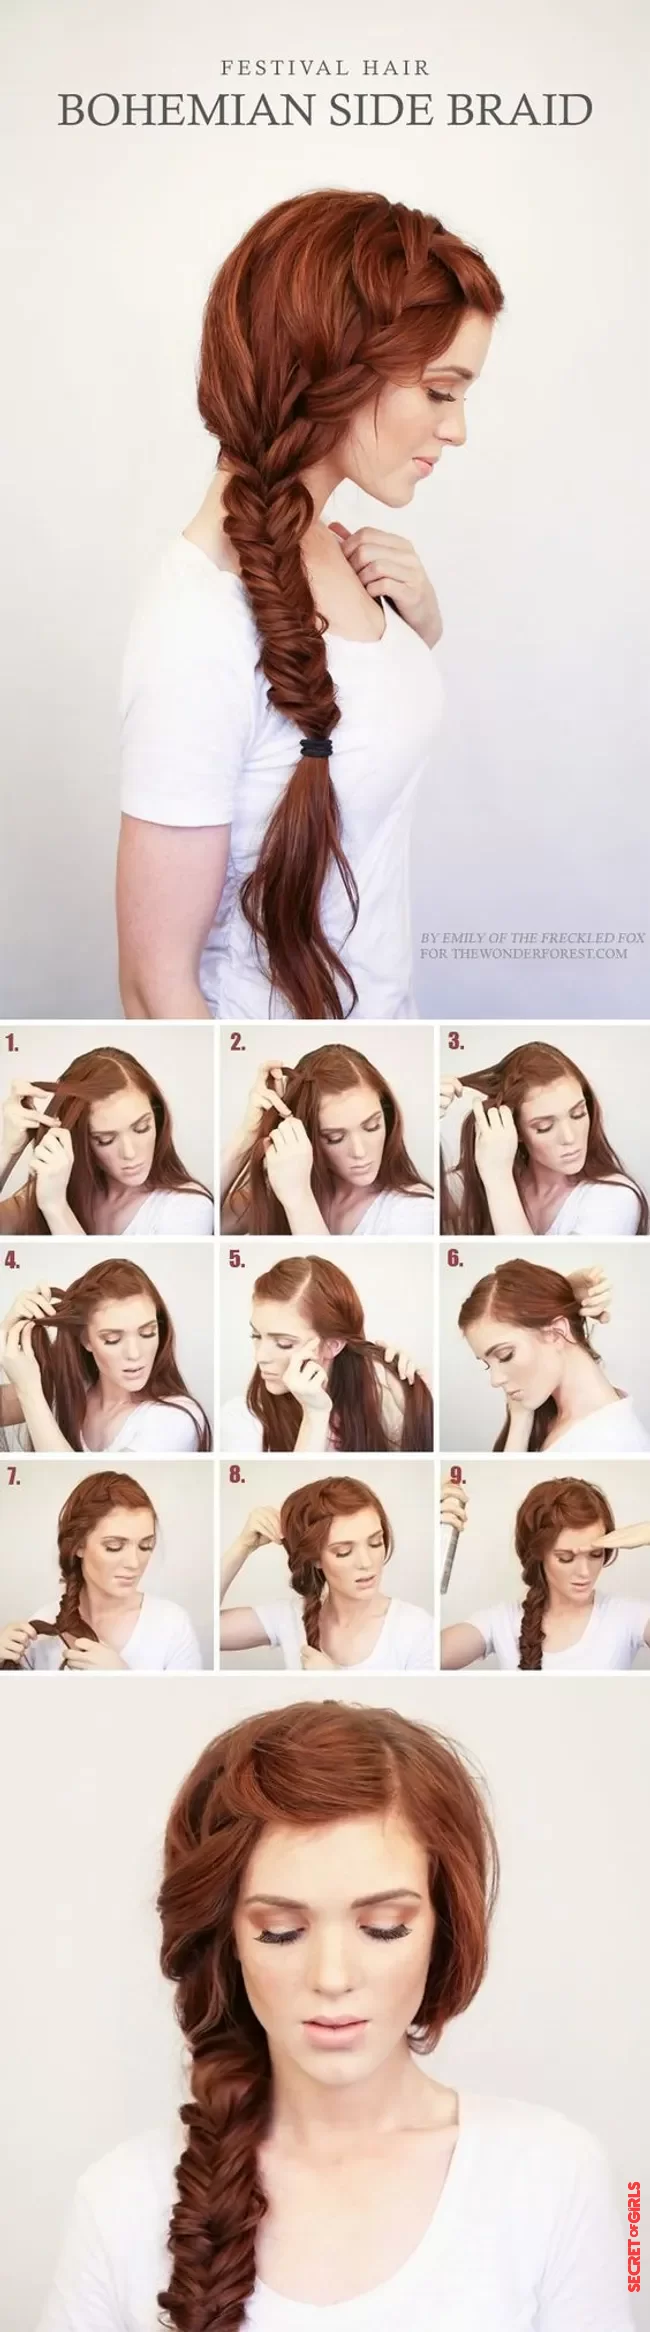 Bohemian braid on the side | 8 Braid Hairstyles Ideas And Our Tips For Success